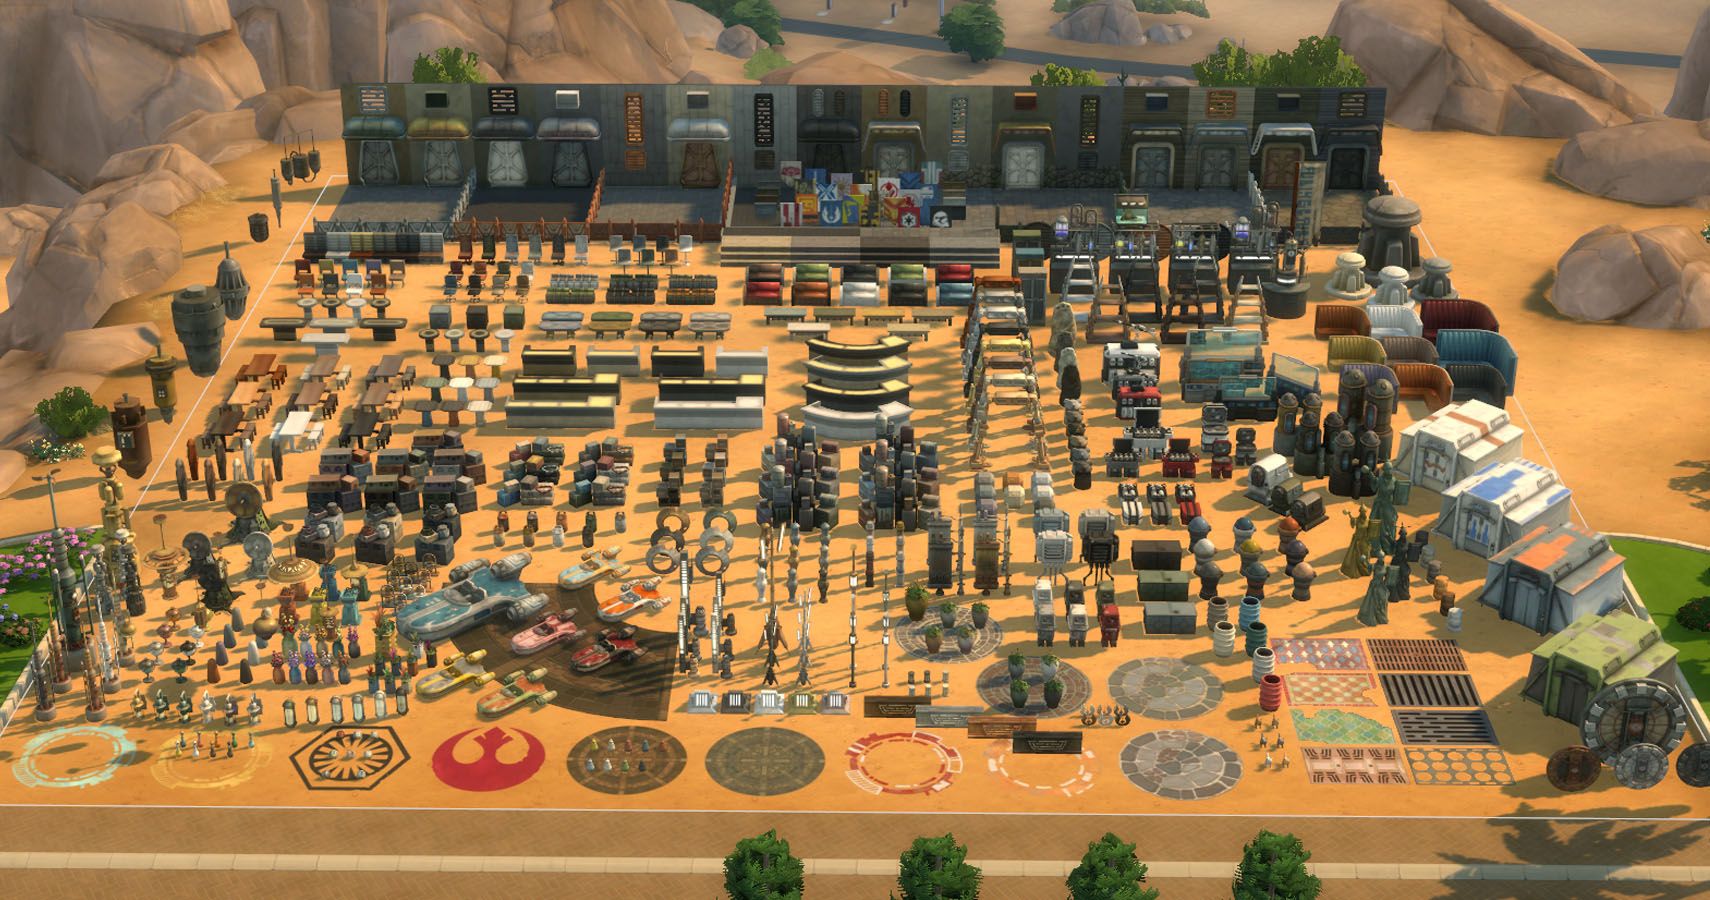 All Journey to Batuu BB items spread out on a large lot.